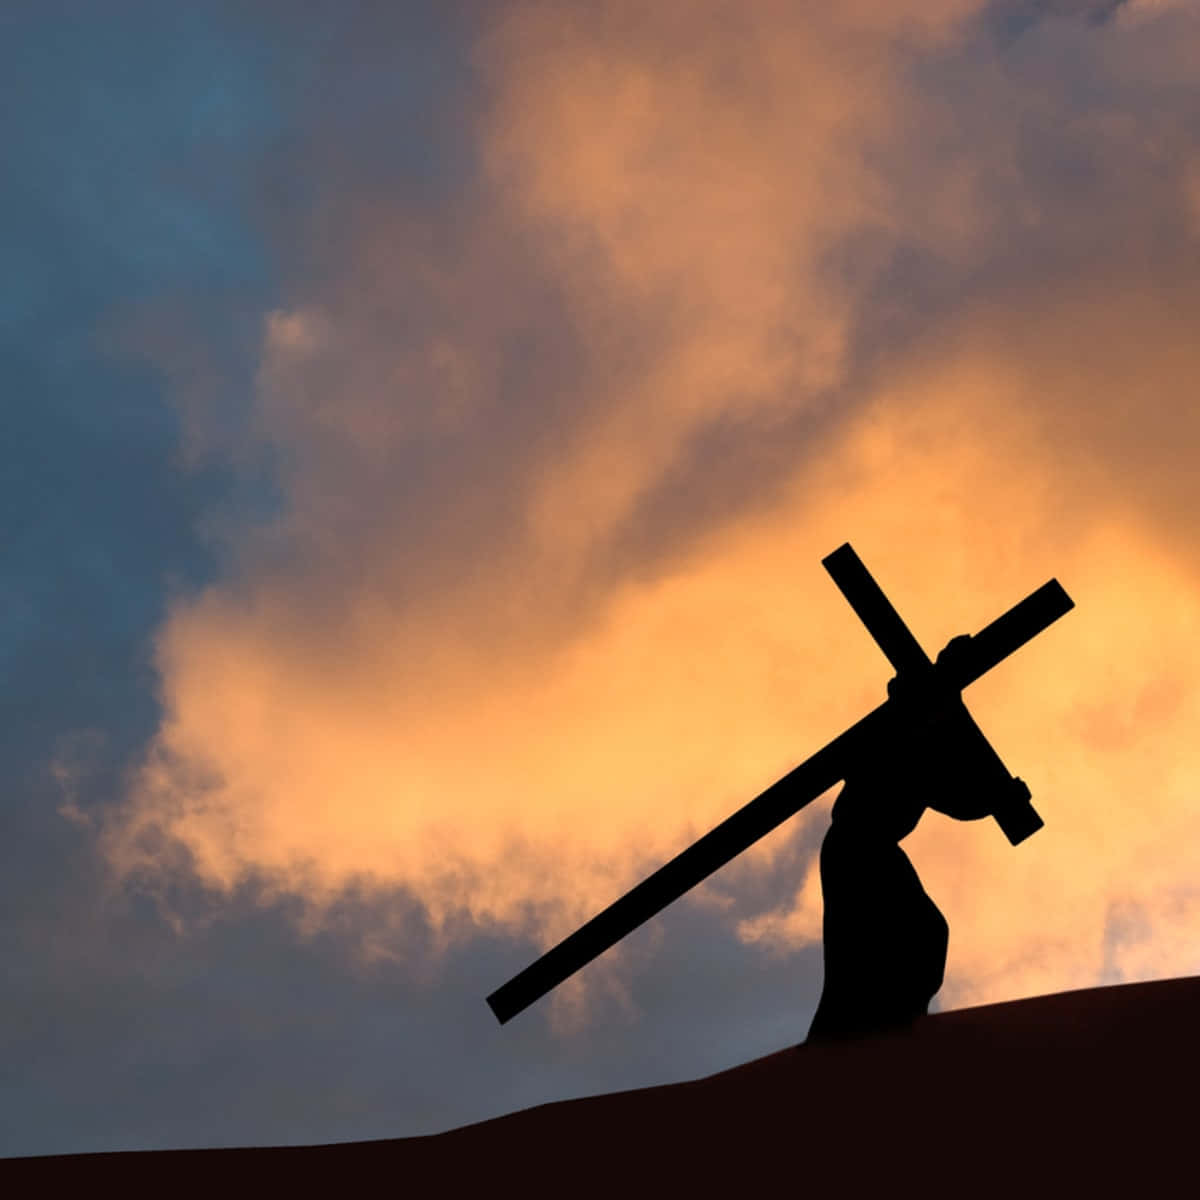 A Silhouette Of A Man Carrying A Cross